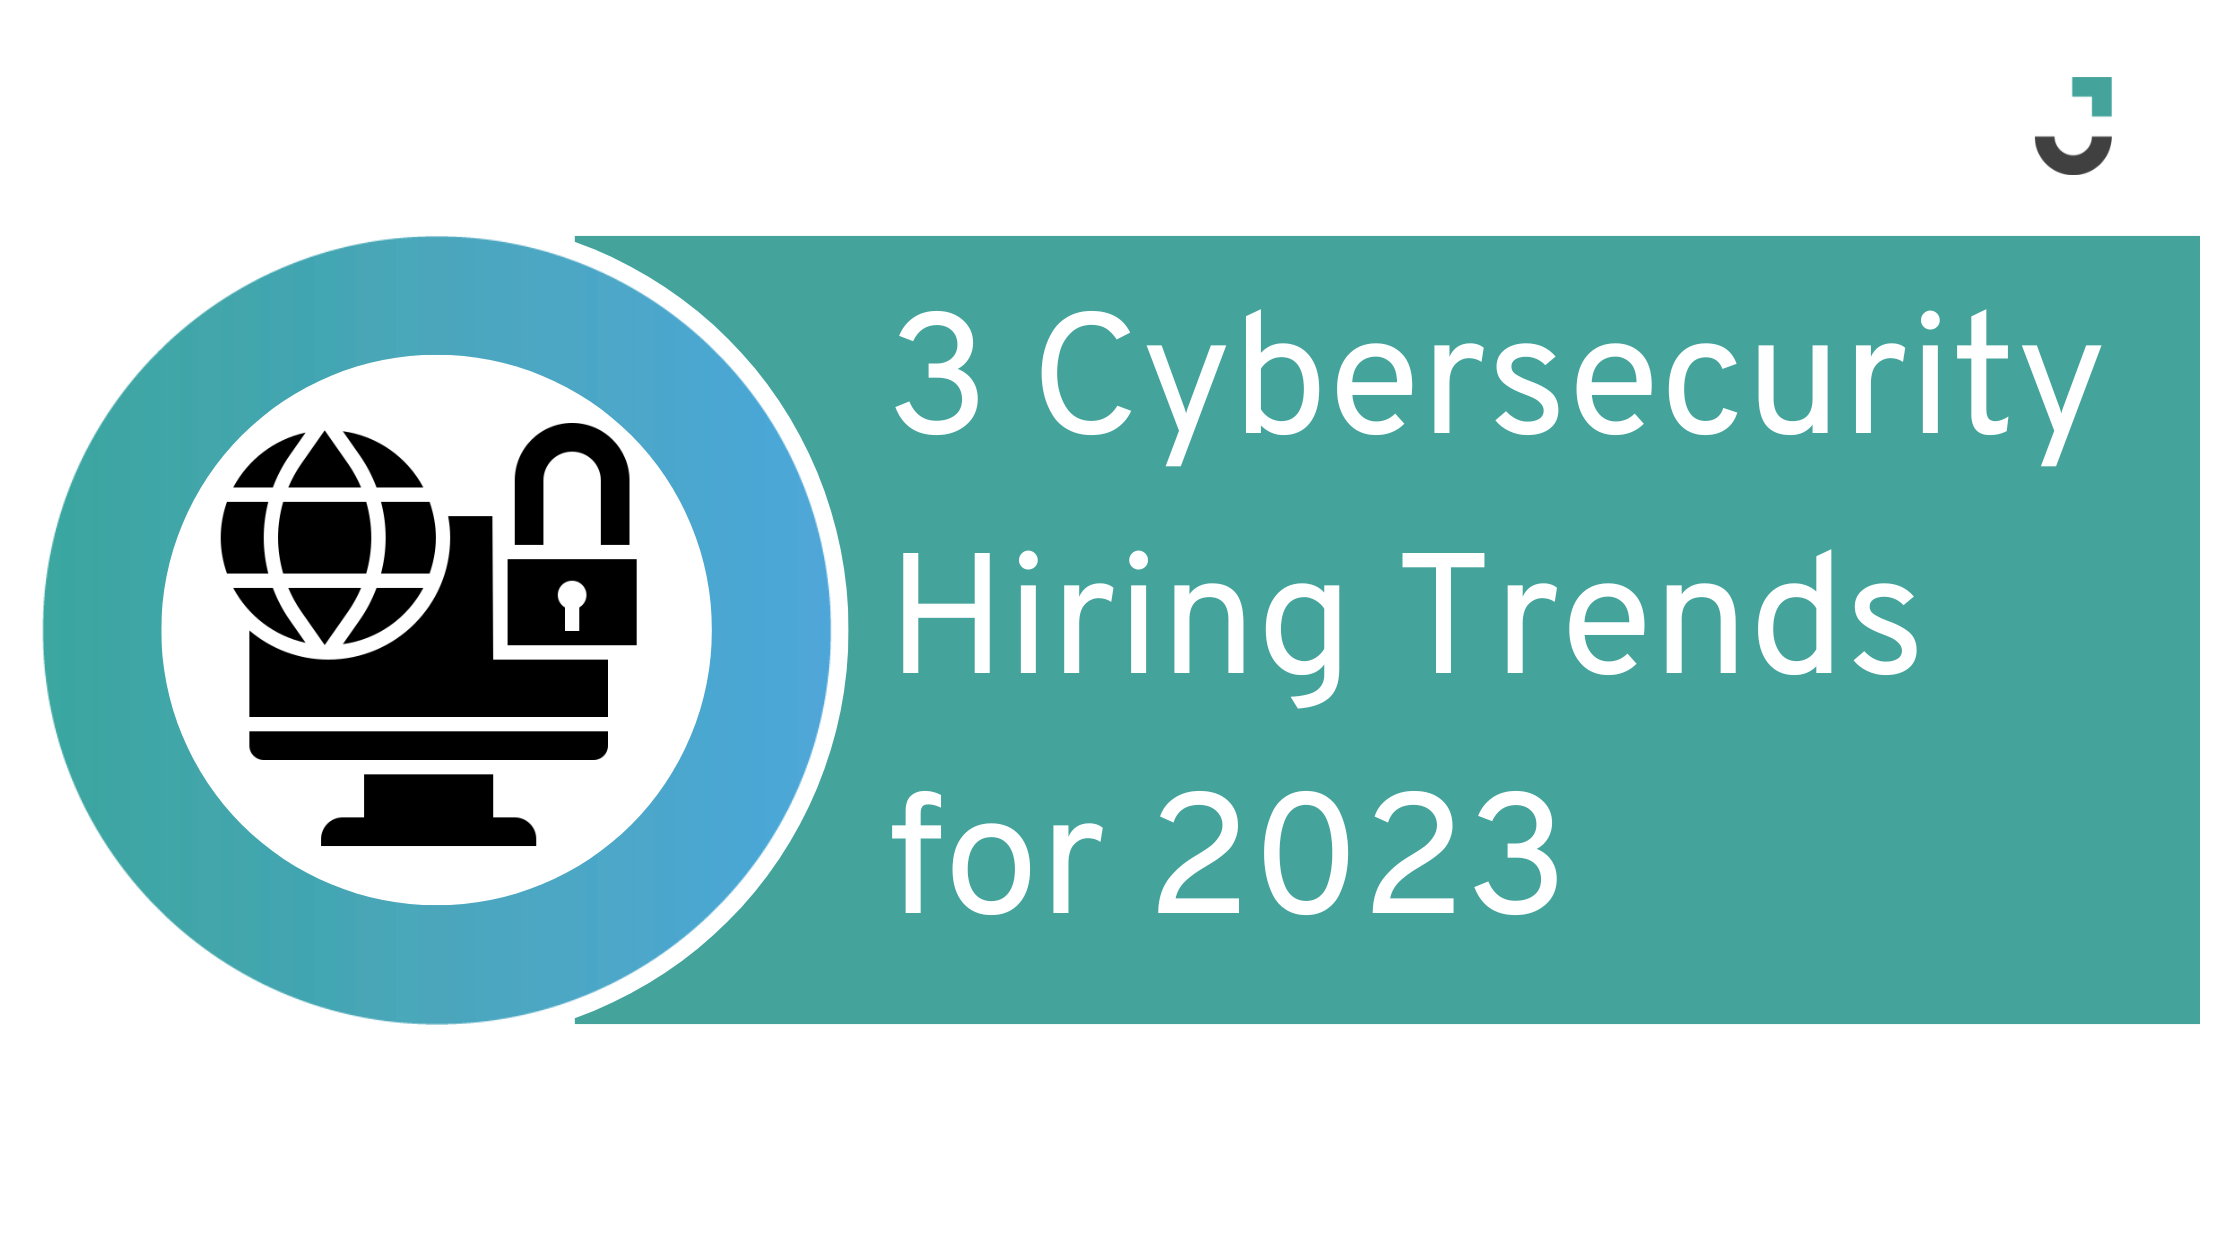 3 Cybersecurity Hiring Trends for 2023